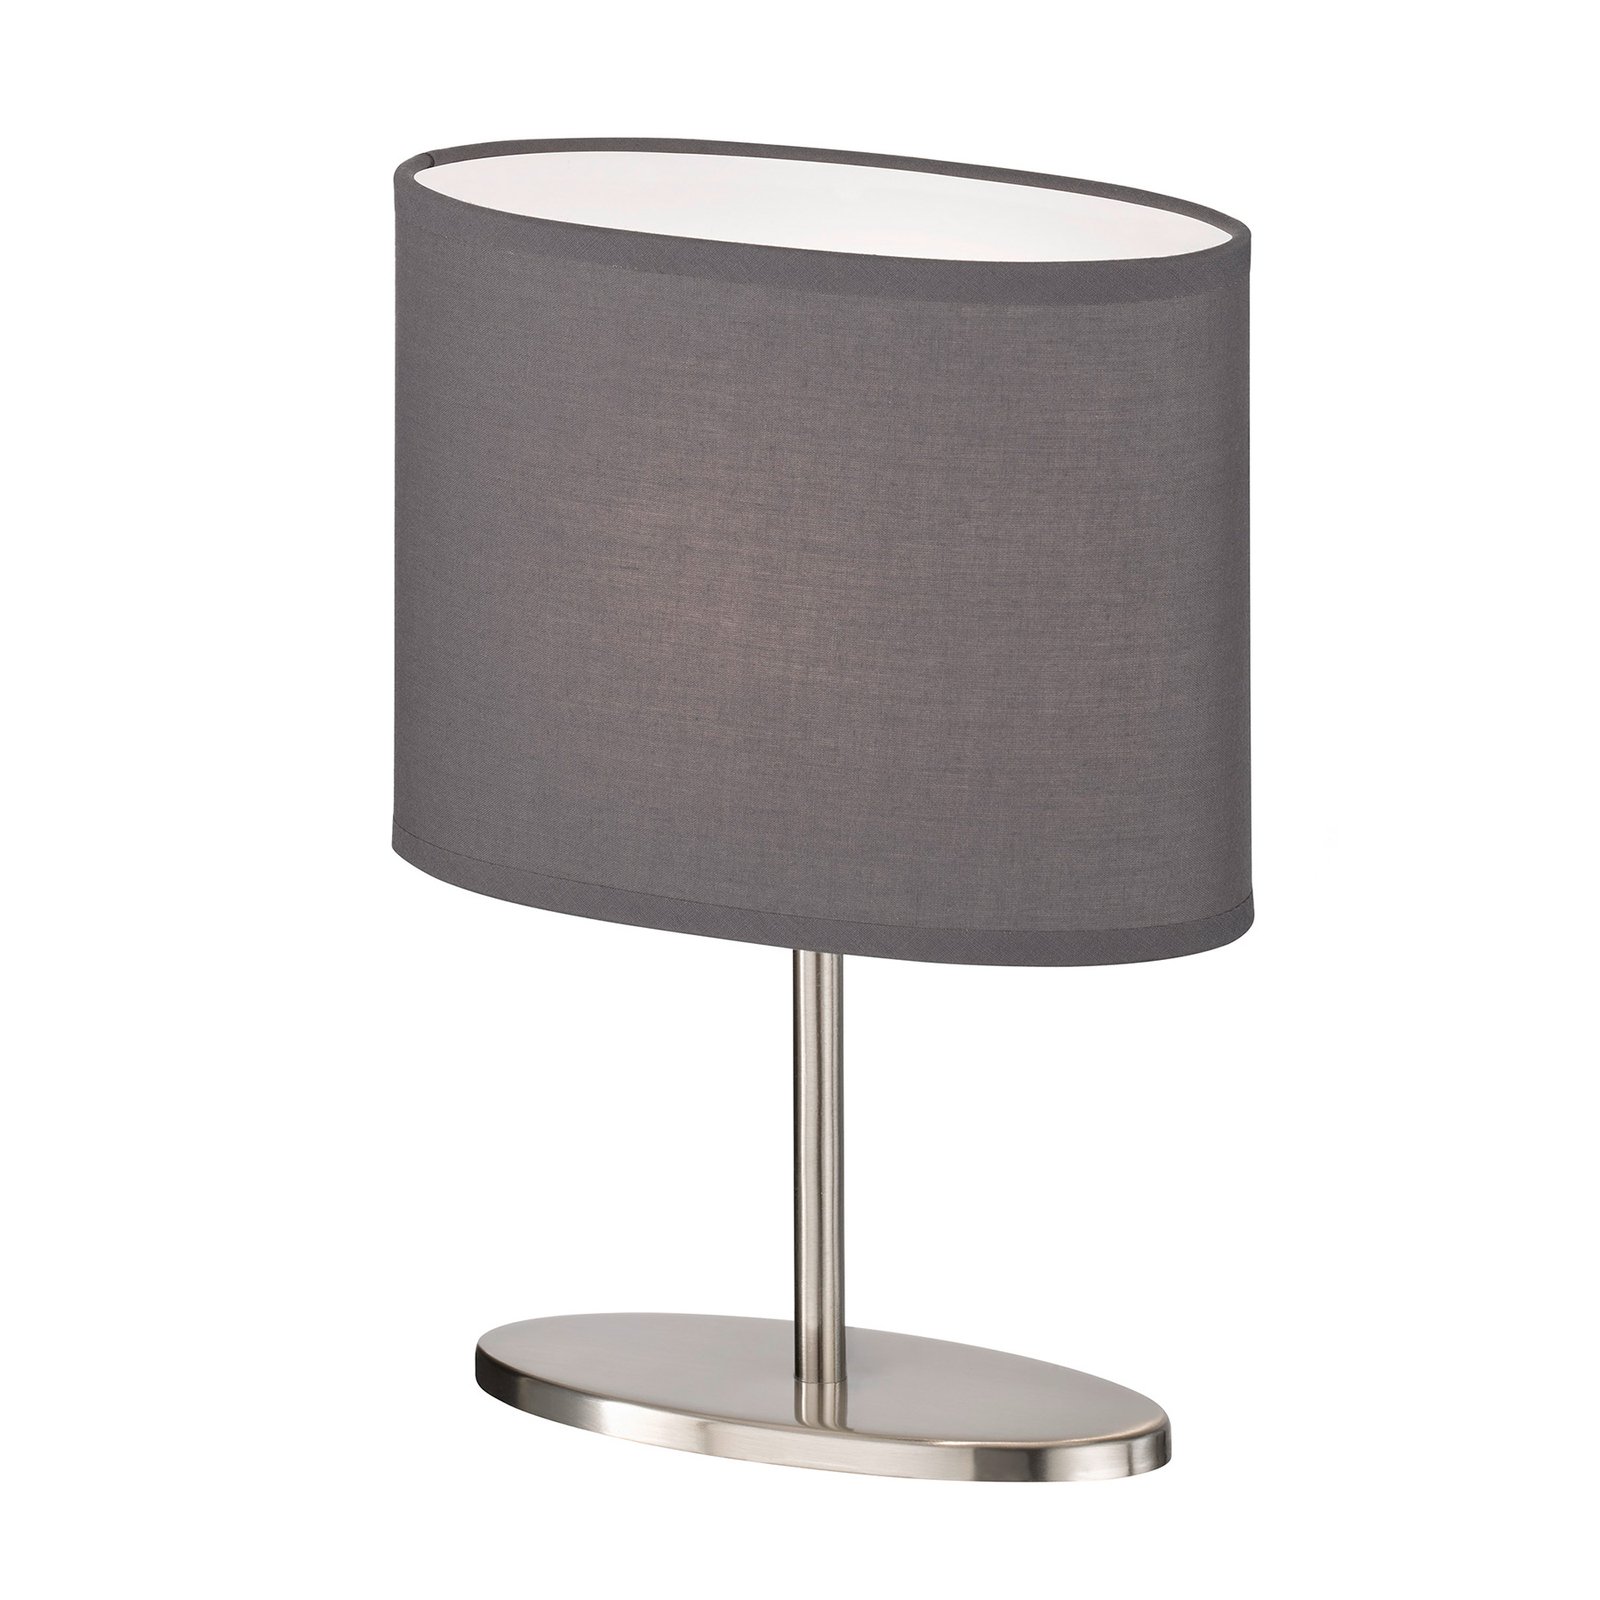 Momo table lamp fabric lampshade nickel/anthracite